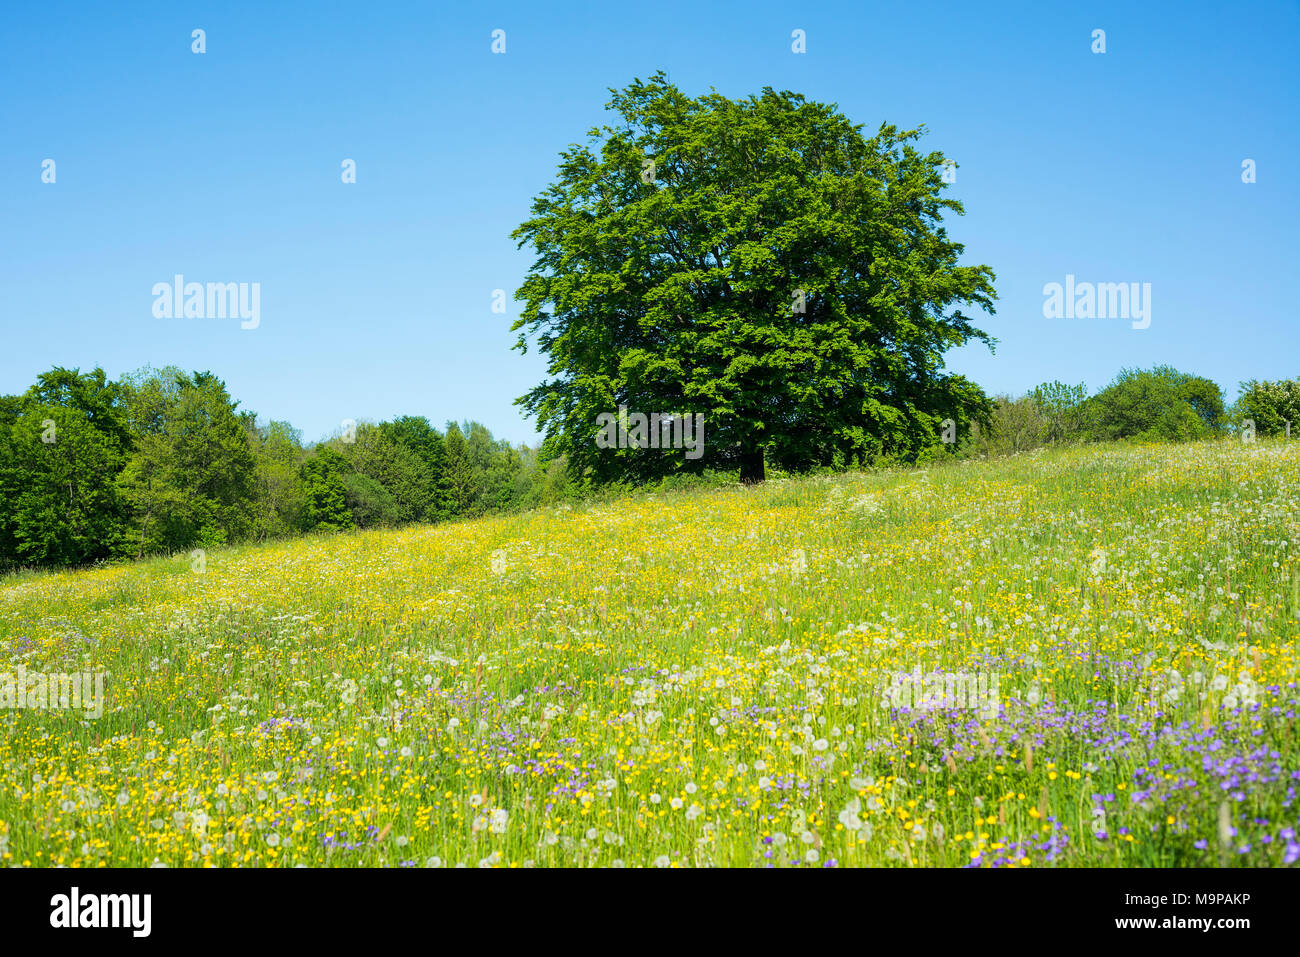 Common beech (Fagus sylvatica) stands in blossoming meadow, Biosphere Reserve Rhön, Hesse, Germany Stock Photo